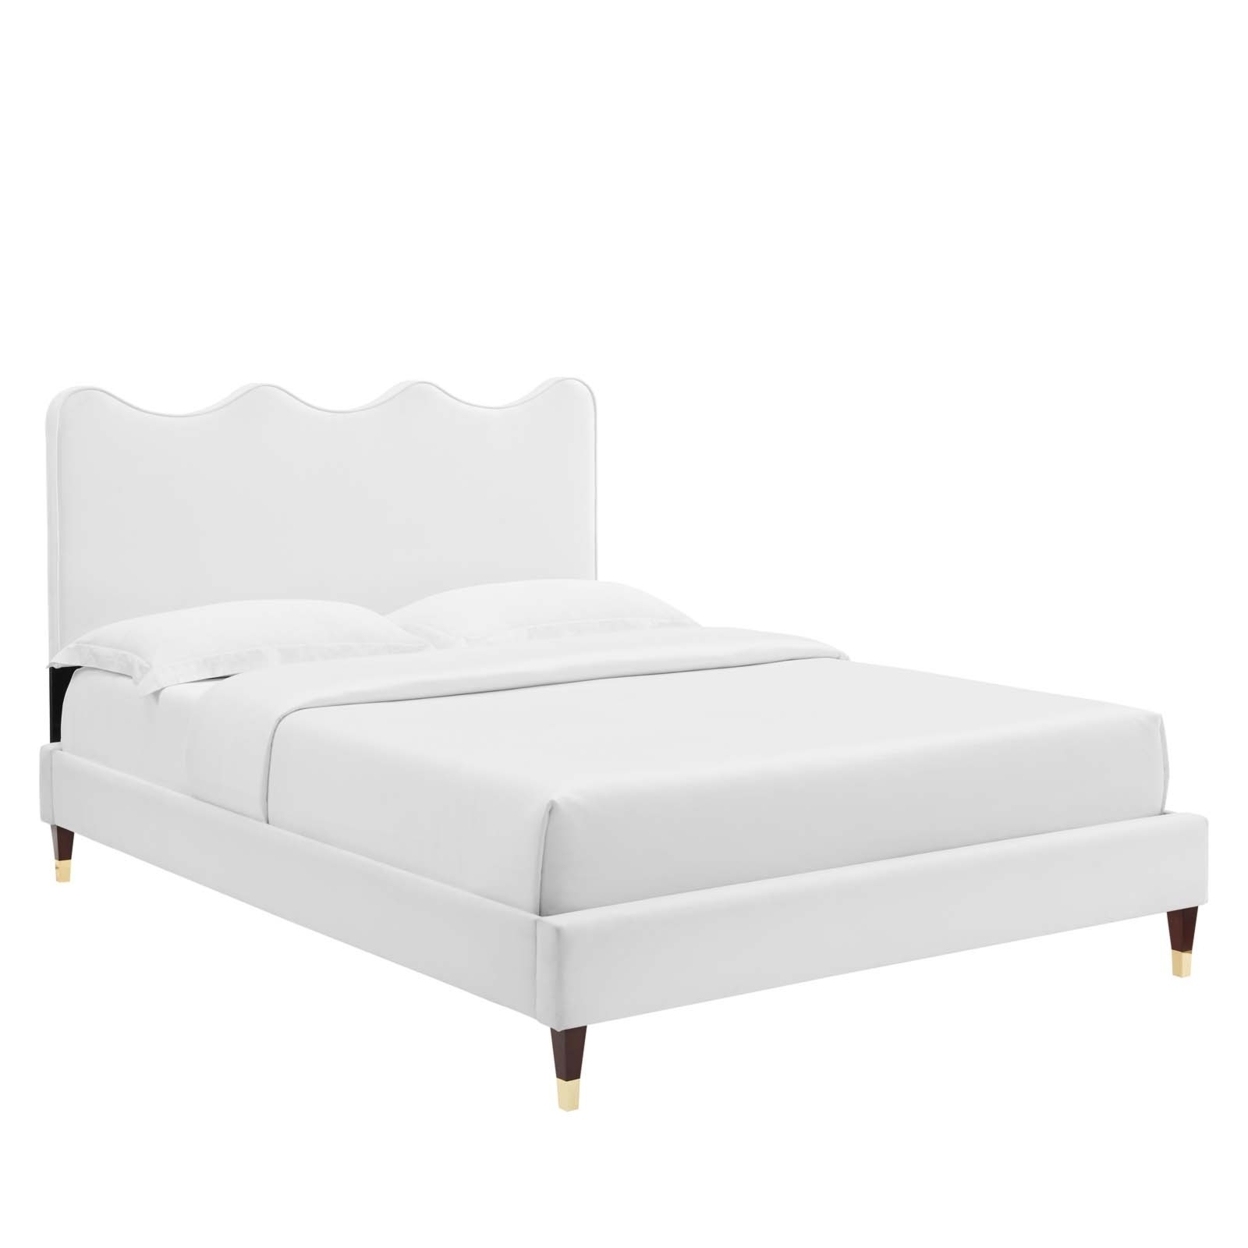 Queen Size Platform Bed With Gold Sleeve Wood Legs, White, Saltoro Sherpi